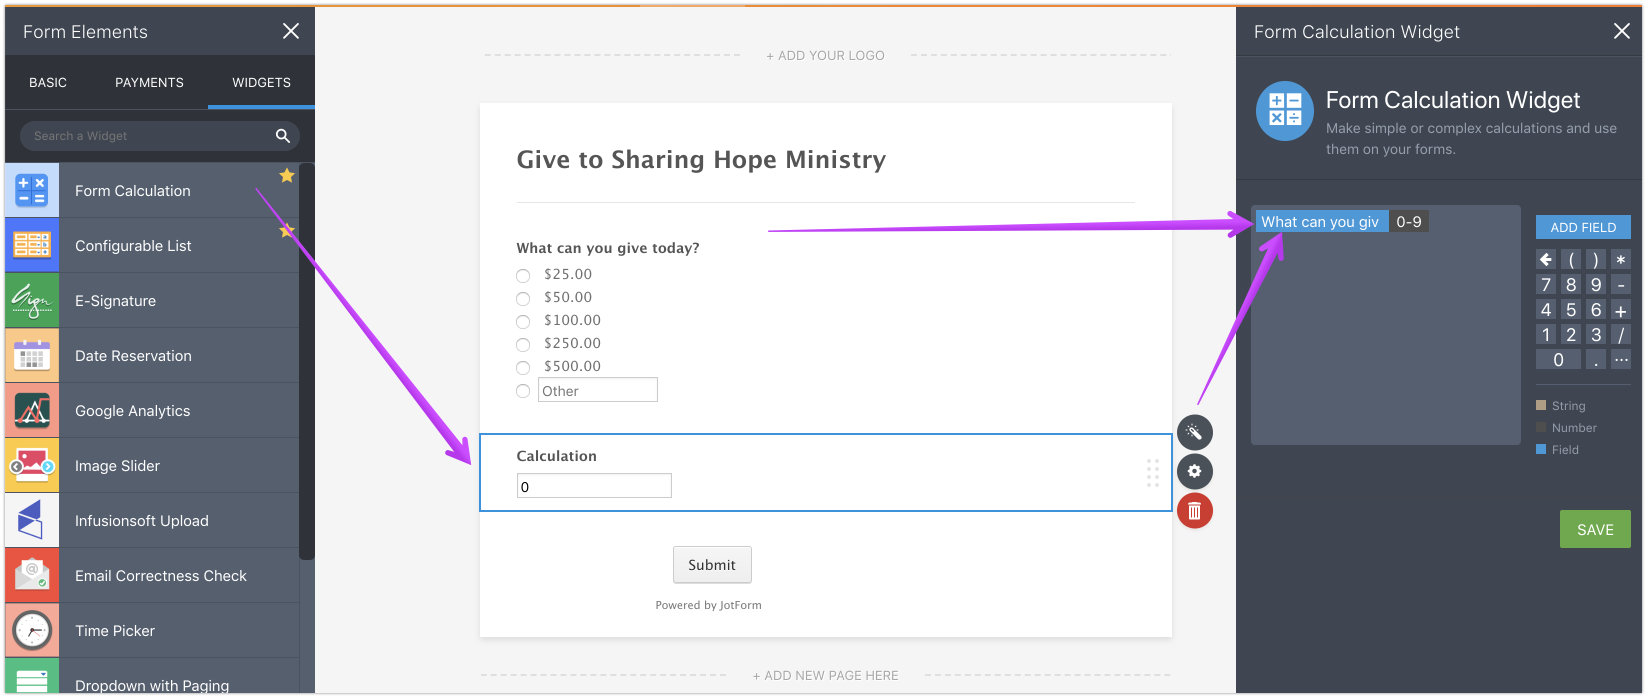 How to collect donations on a form? Image 2 Screenshot 41